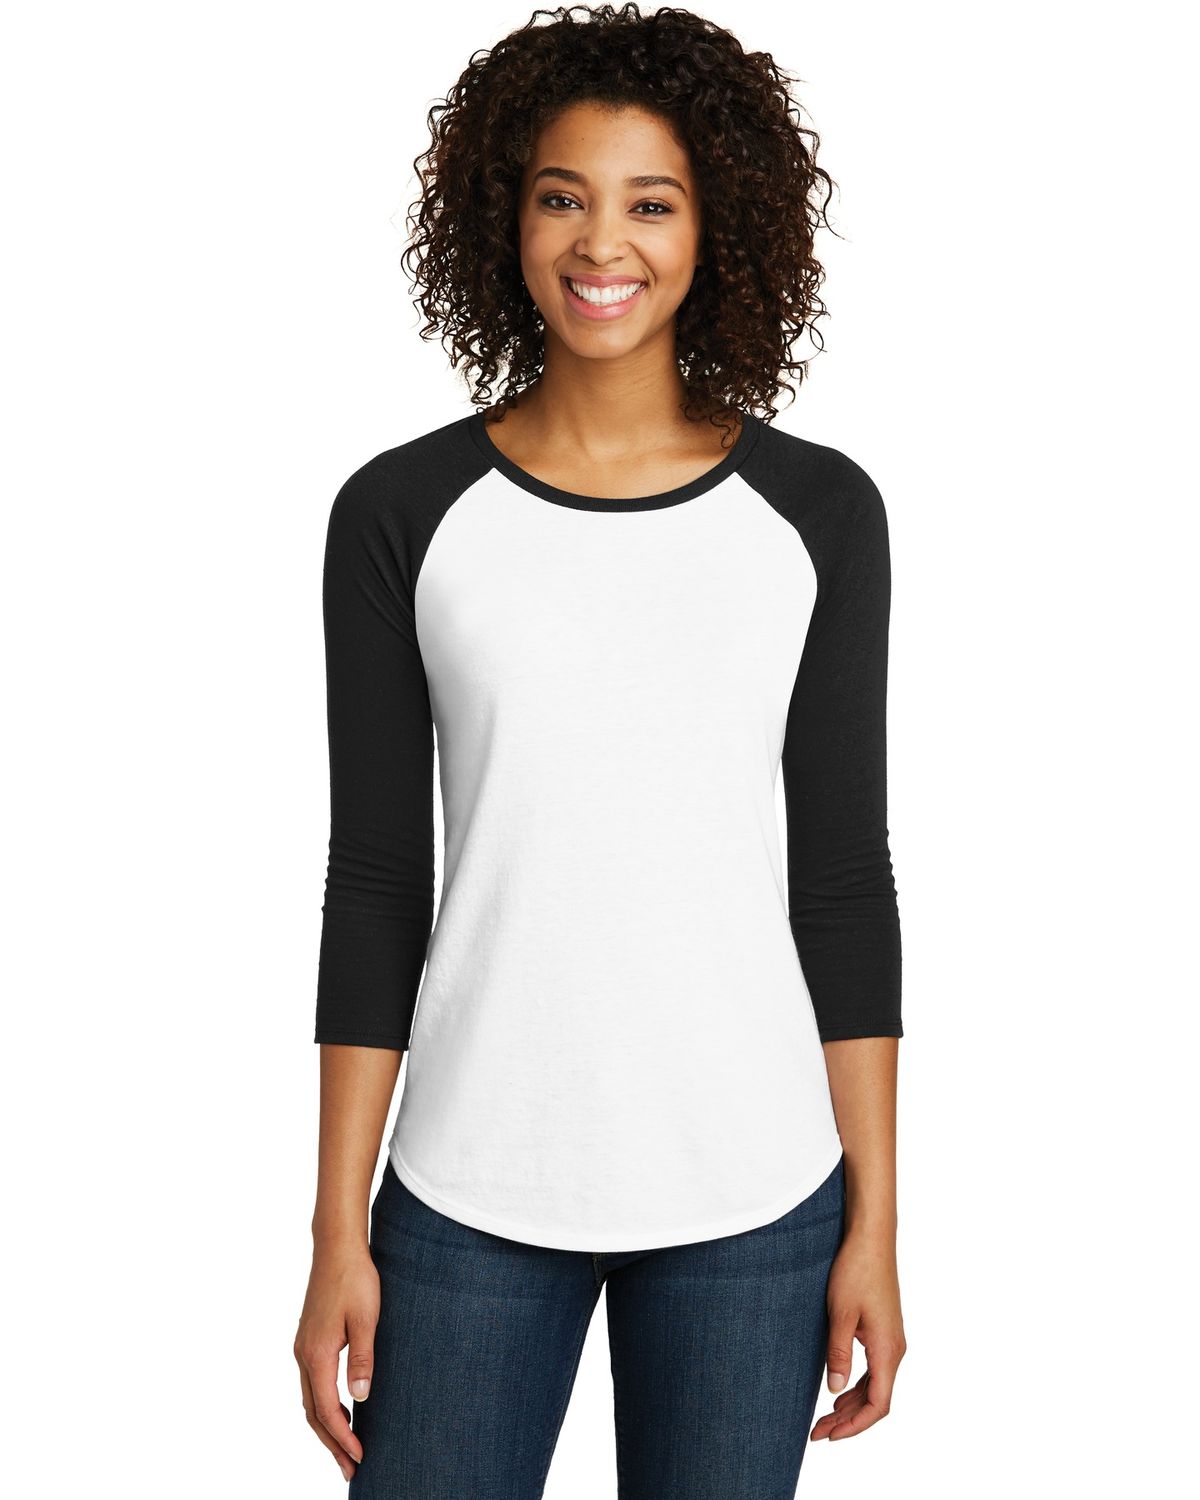 'District DT6211 Women's Fitted Very Important Tee 3/4 Sleeve Raglan'